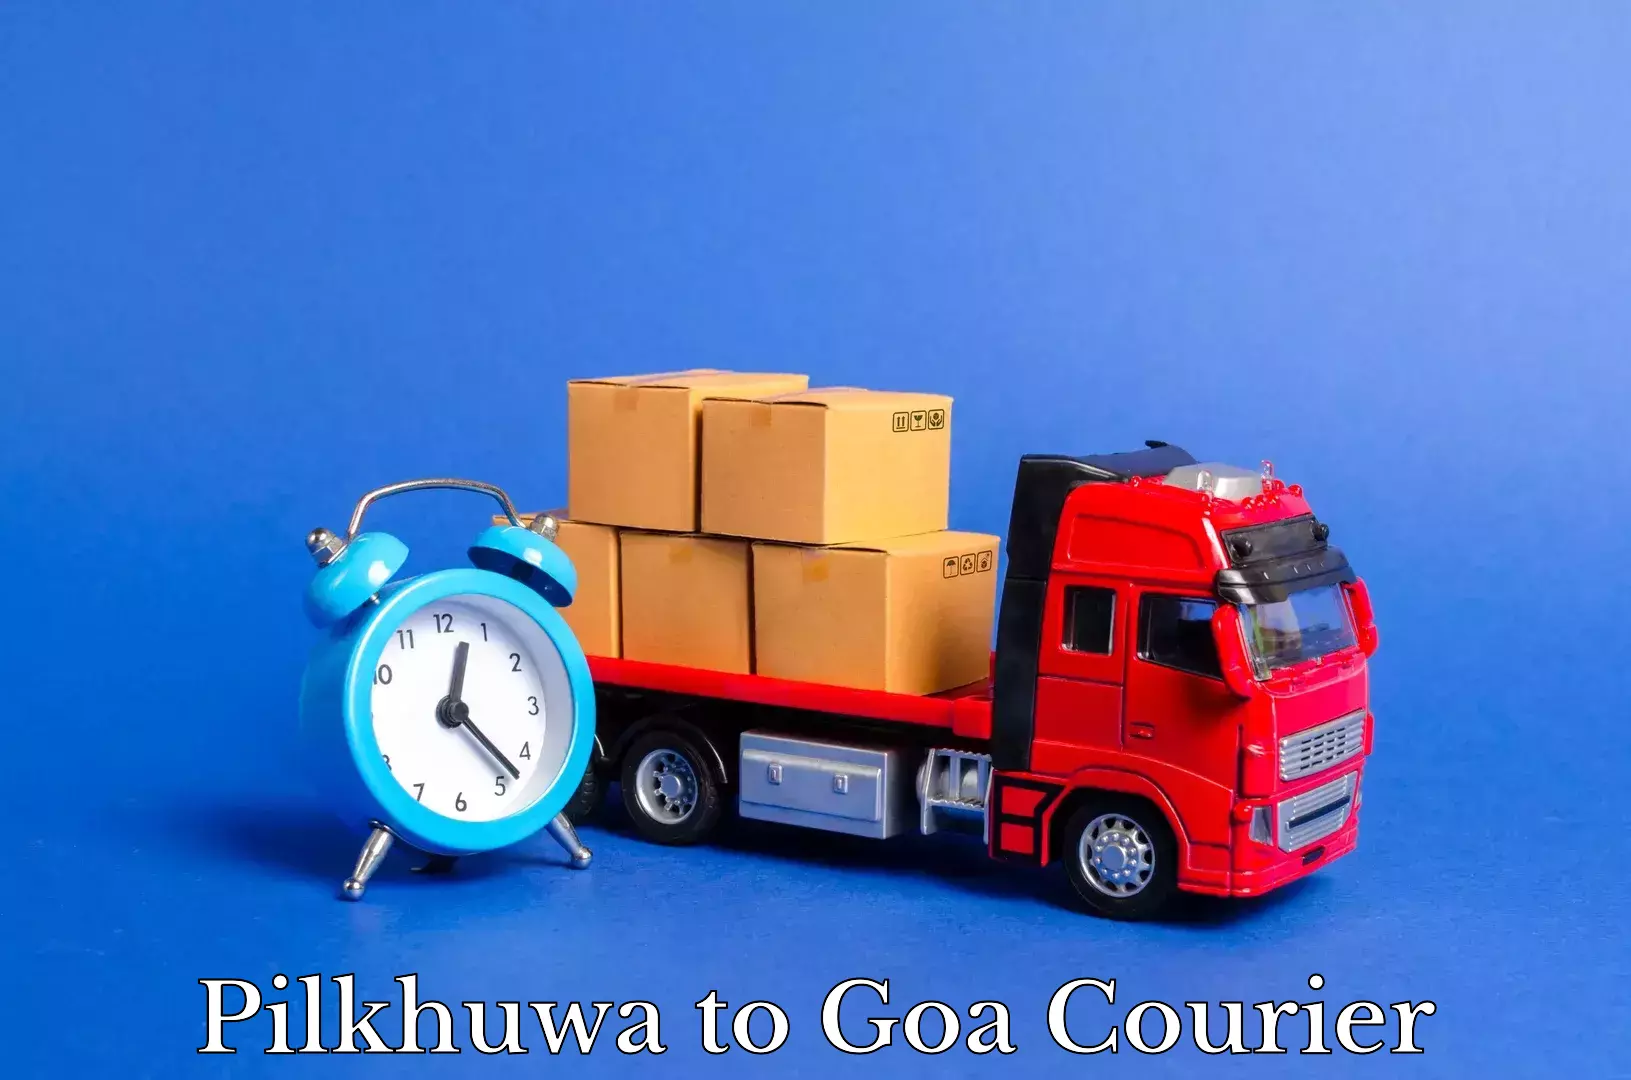 Professional relocation services Pilkhuwa to Goa